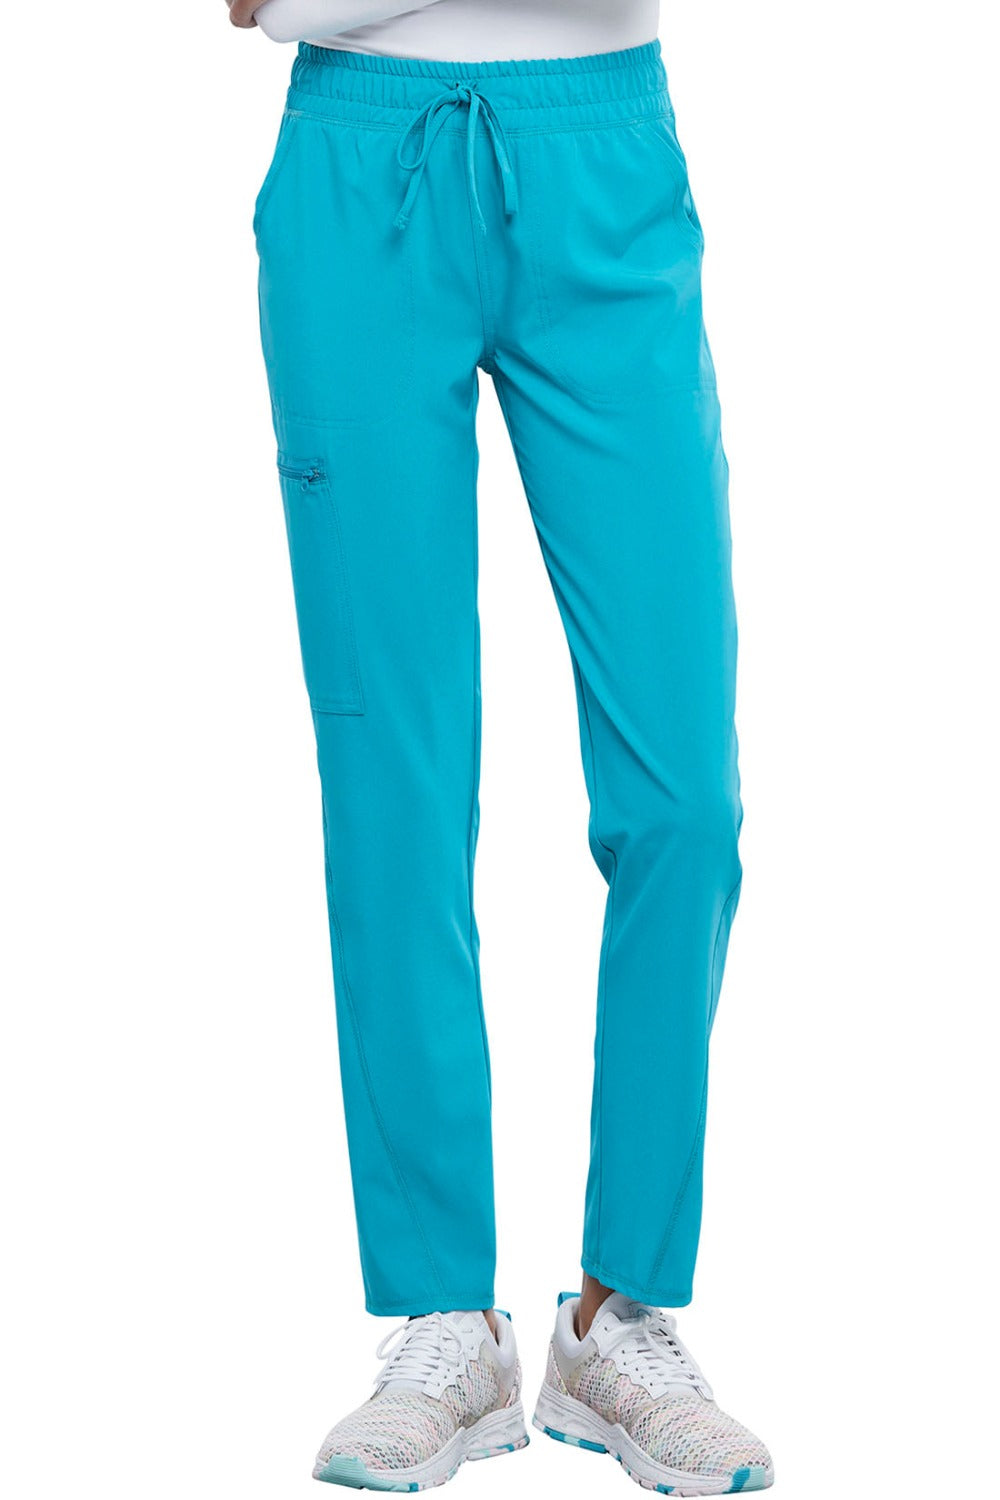 Cherokee Allura Petite Scrub Pant Mid Rise Tapered Leg Drawstring in Teal Blue at Parker's Clothing and Shoes.